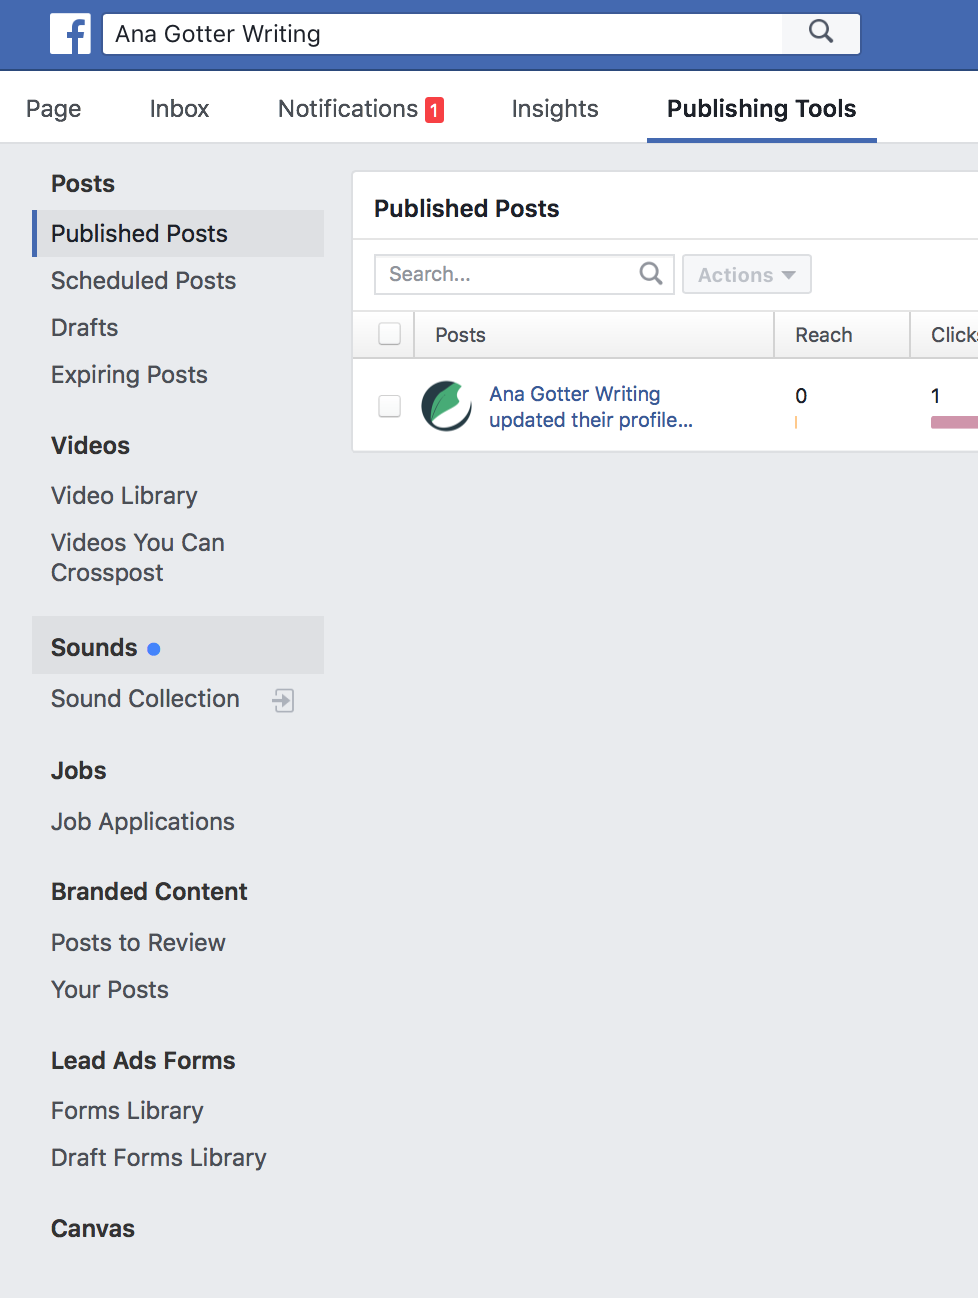 How to Create a Fullscreen Canvas Experience on Facebook